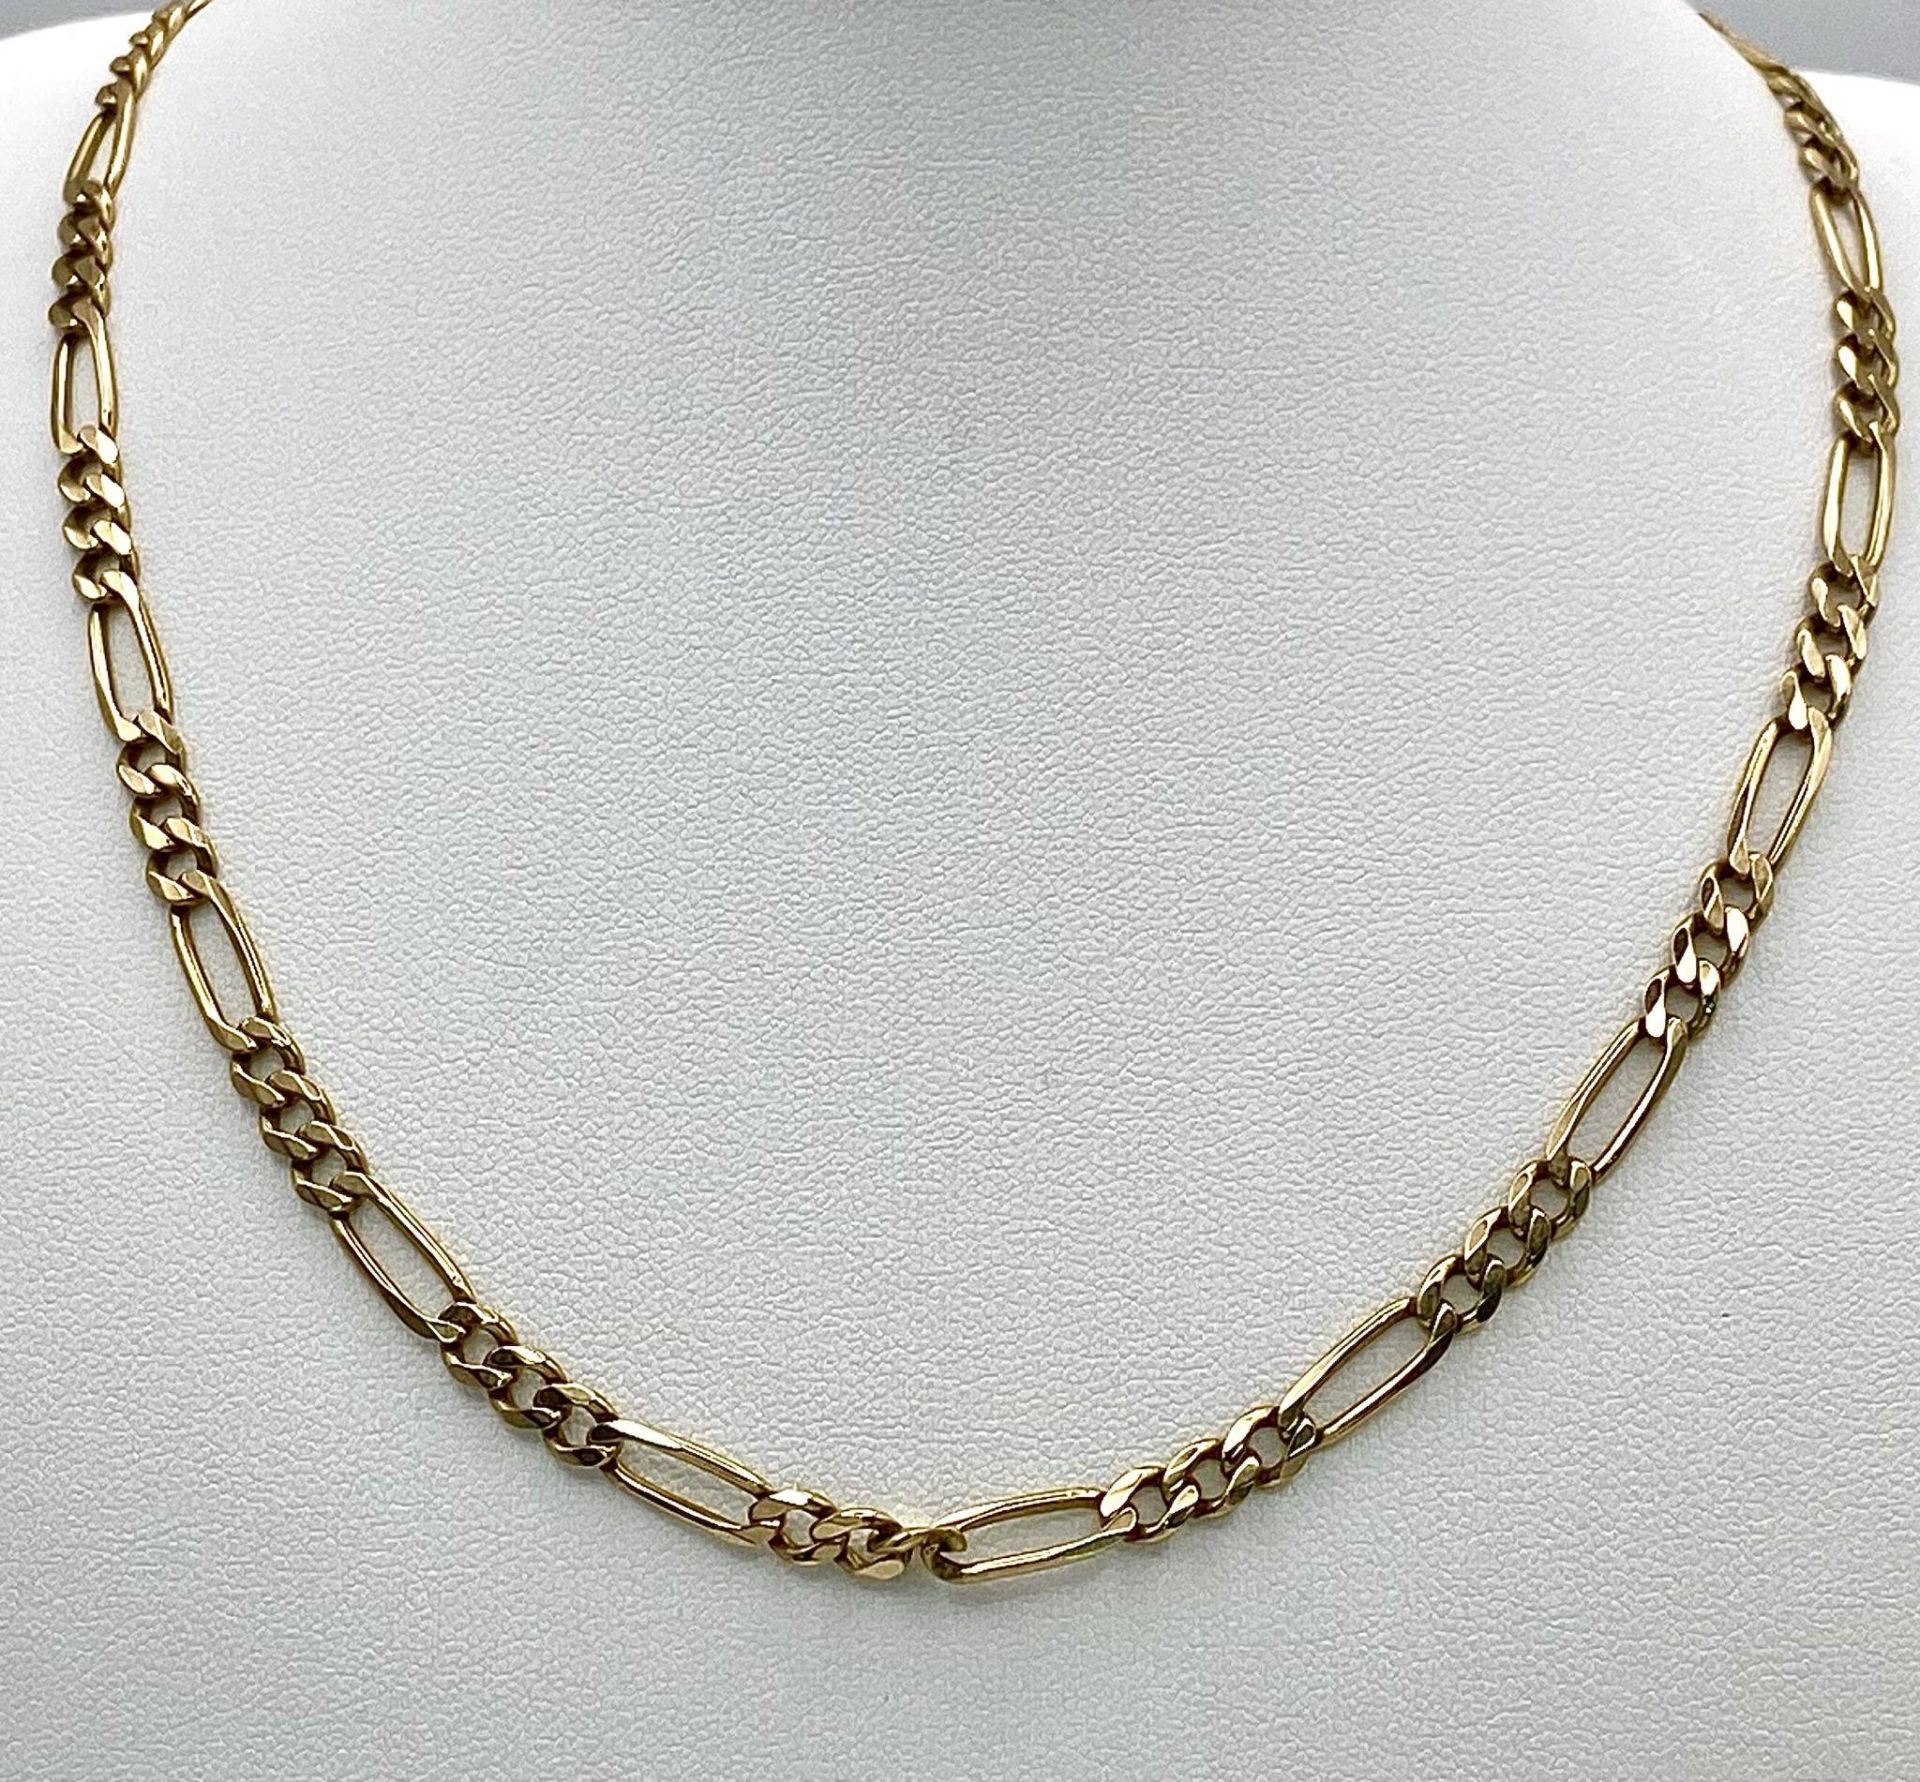 A Vintage 9K Yellow Gold Figaro Link Necklace. 45cm length. 14.1g weight. - Image 3 of 5